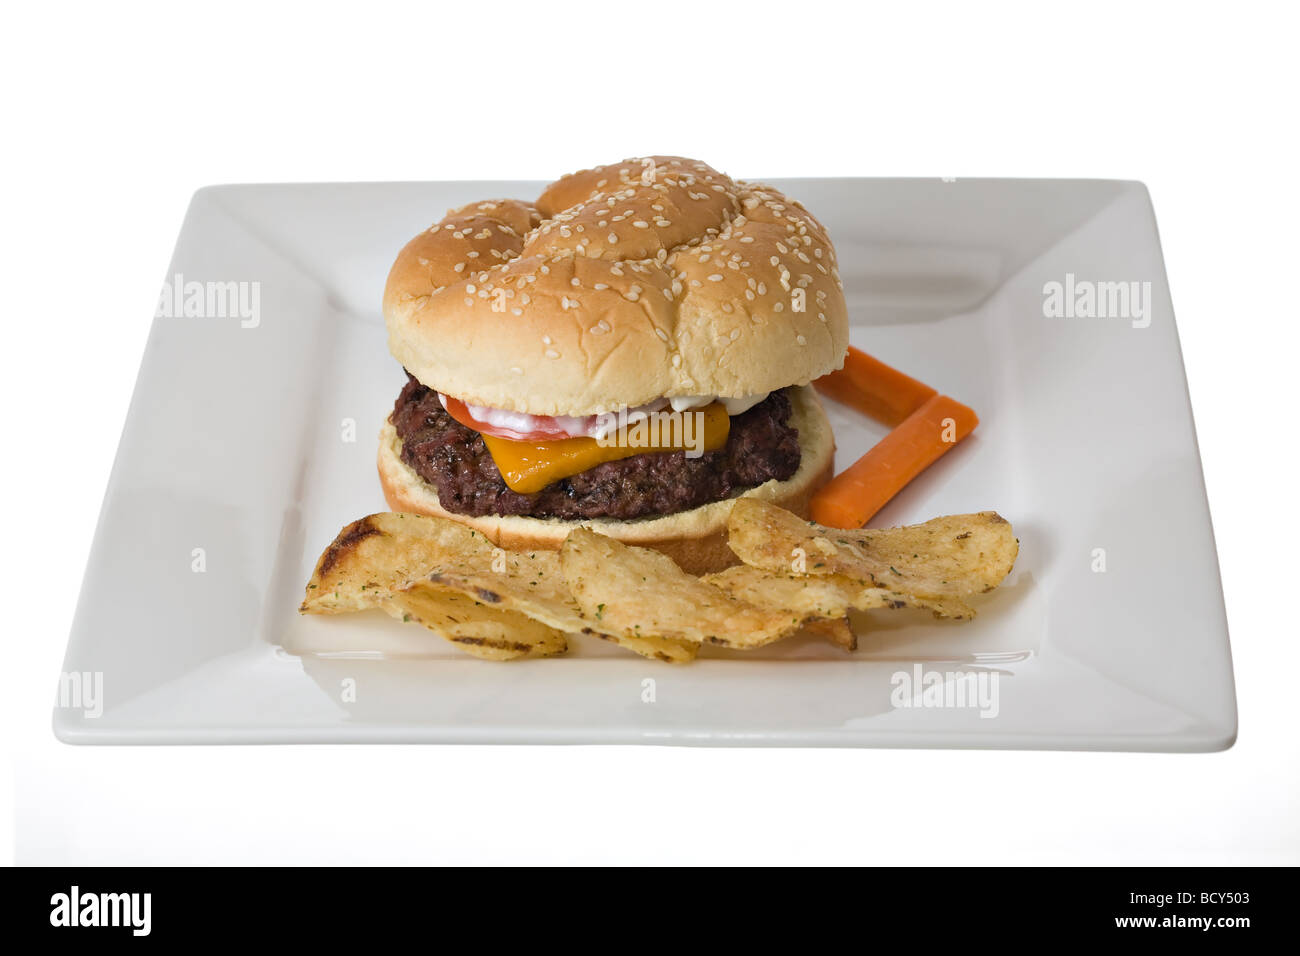 Cheesburger potato chips and two carrot sticks on white plate Carrots offer a little bit of balance to an otherwise fatty meal. Stock Photo